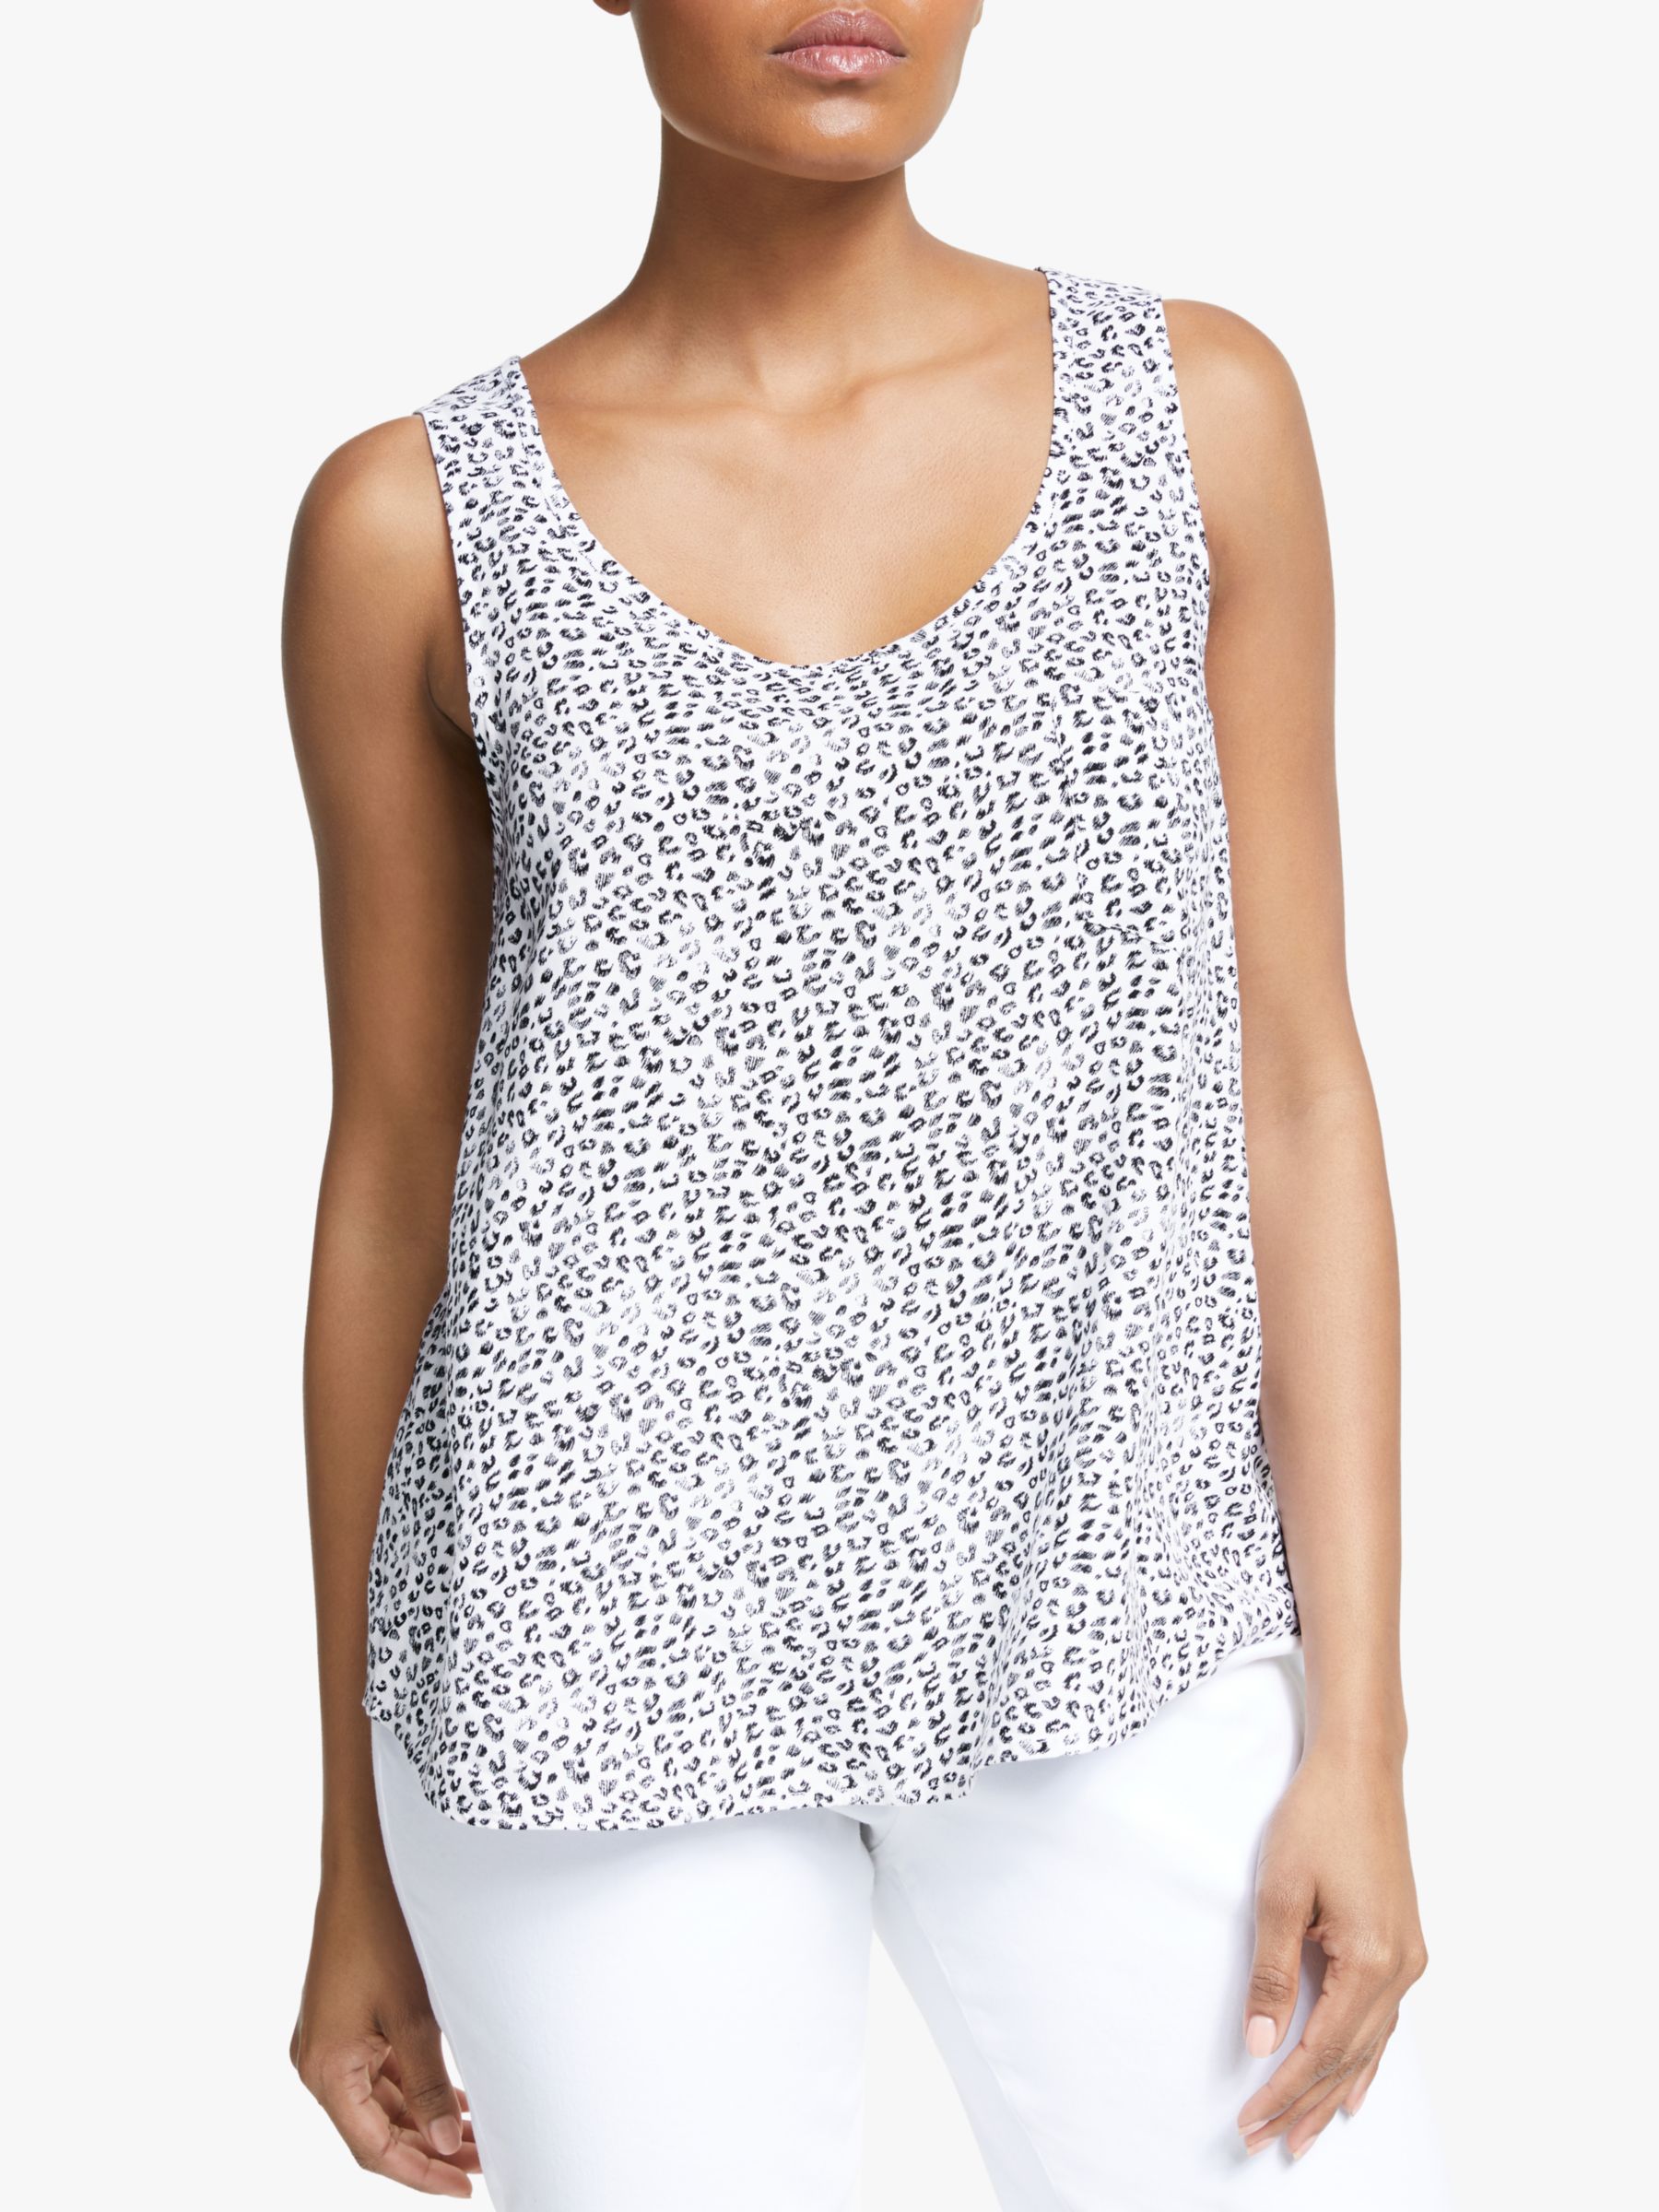 Collection WEEKEND by John Lewis Mimosa Leopard Print Sleeveless Top, White/Black